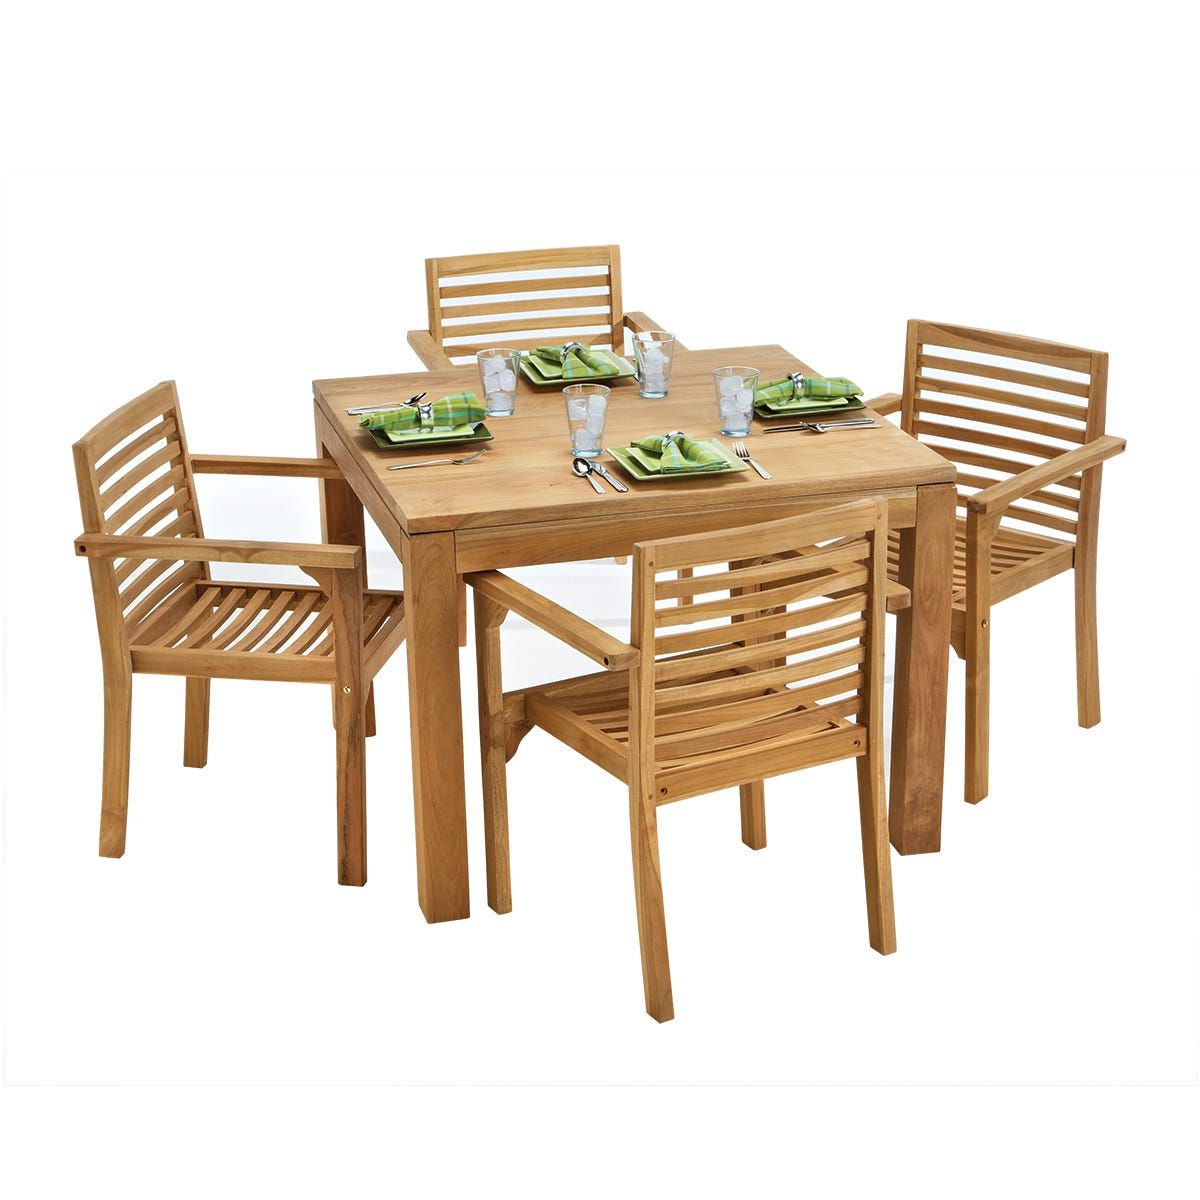 Square Teak Outdoor Dining Table – From Sportys Preferred Living In Latest Teak Outdoor Square Dining Sets (View 11 of 15)